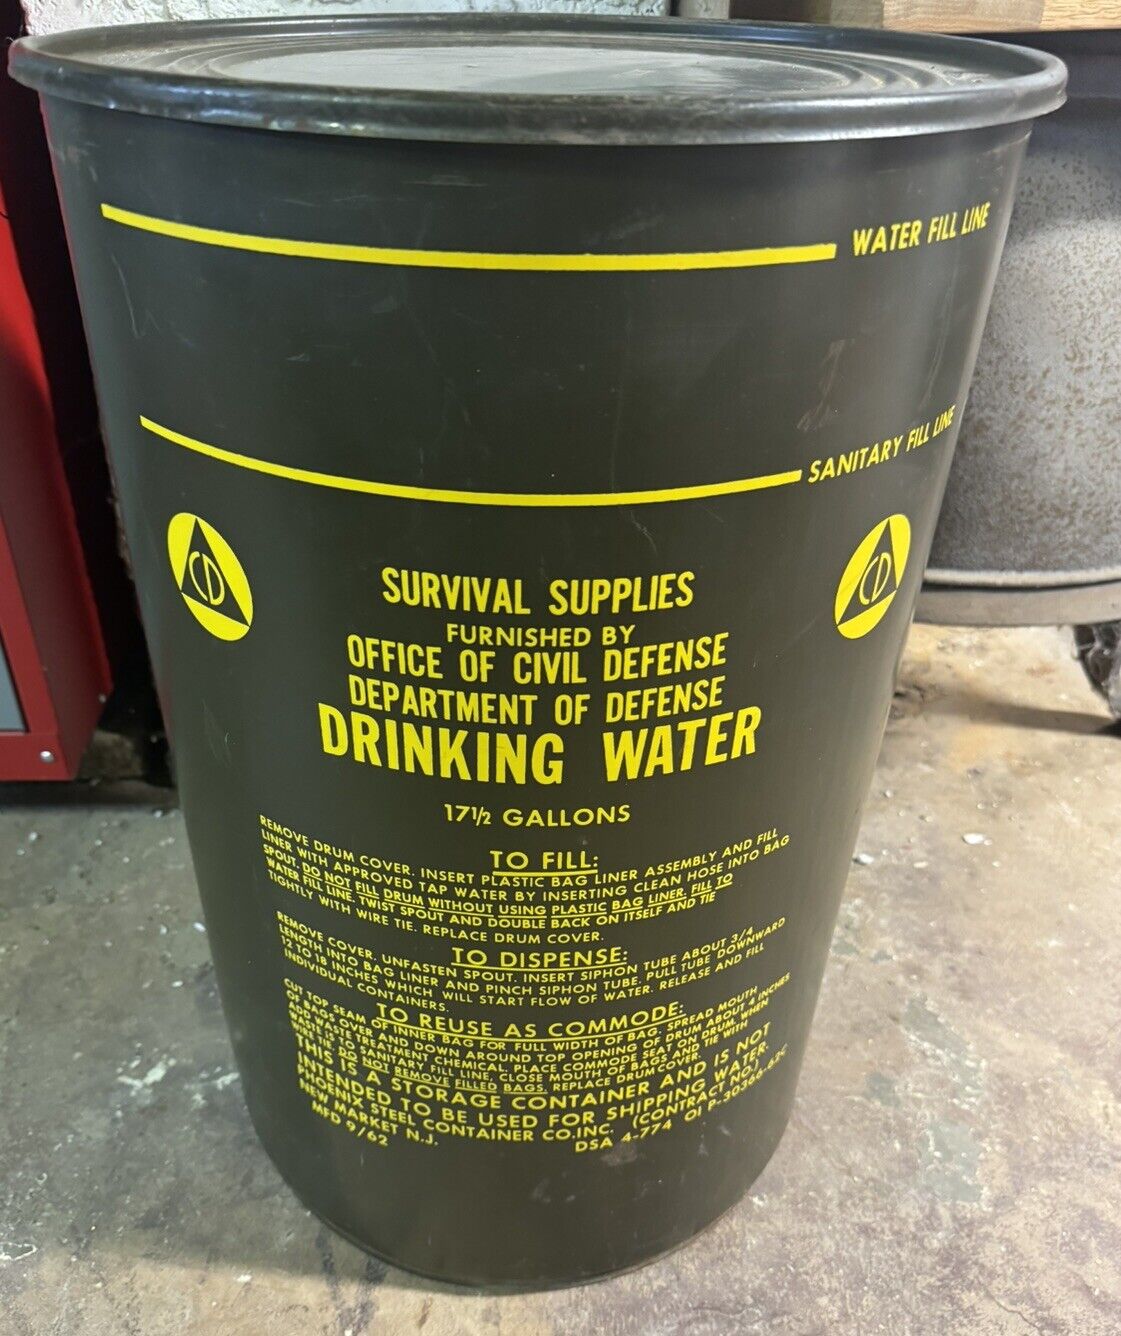 Department of Civil Defense Survival Drinking Water Drum 17.5 Gal FALLOUT STYLE